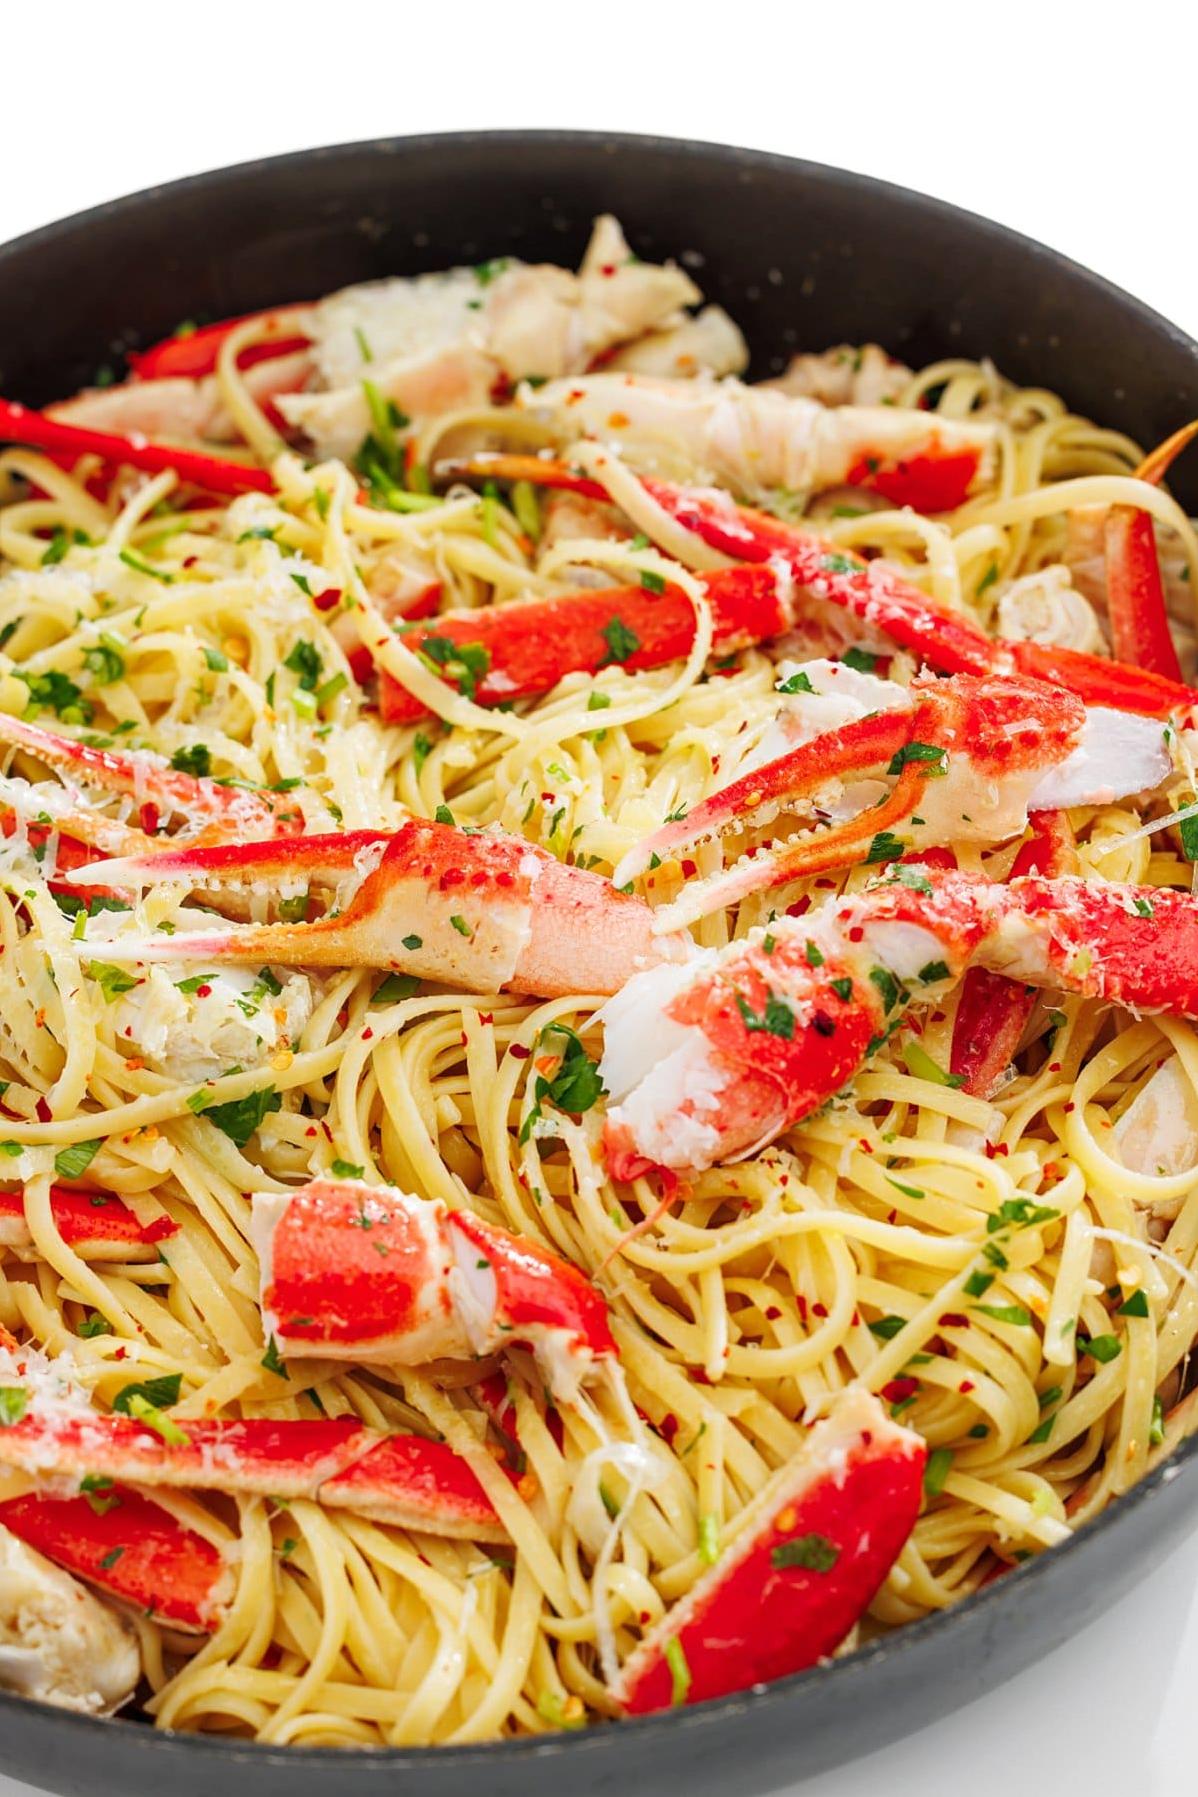  Satisfy your cravings with this creamy and savory pasta dish.